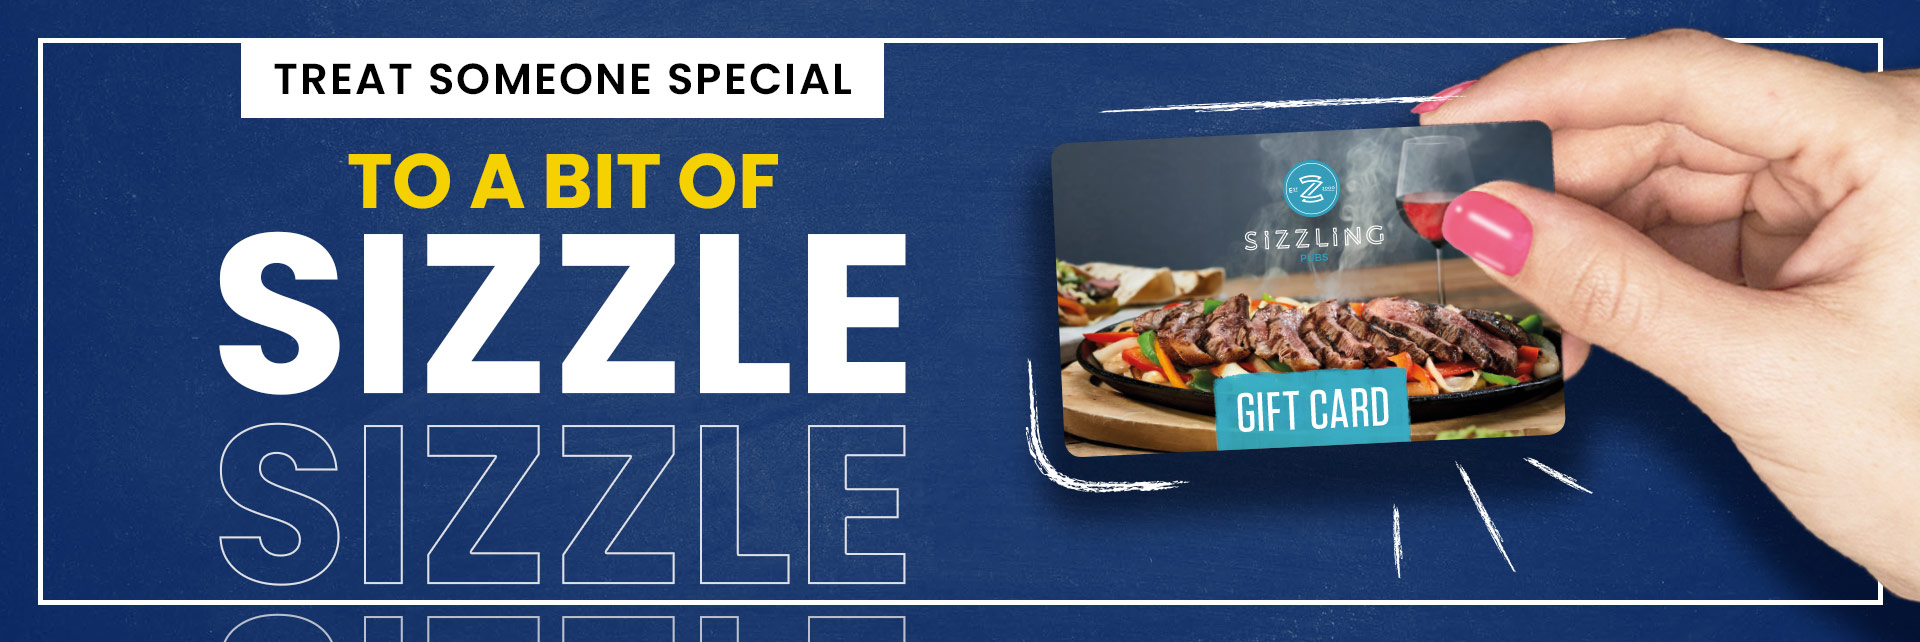 Sizzling Pubs Gift Card at The Haywain, St Ives in St. Ives